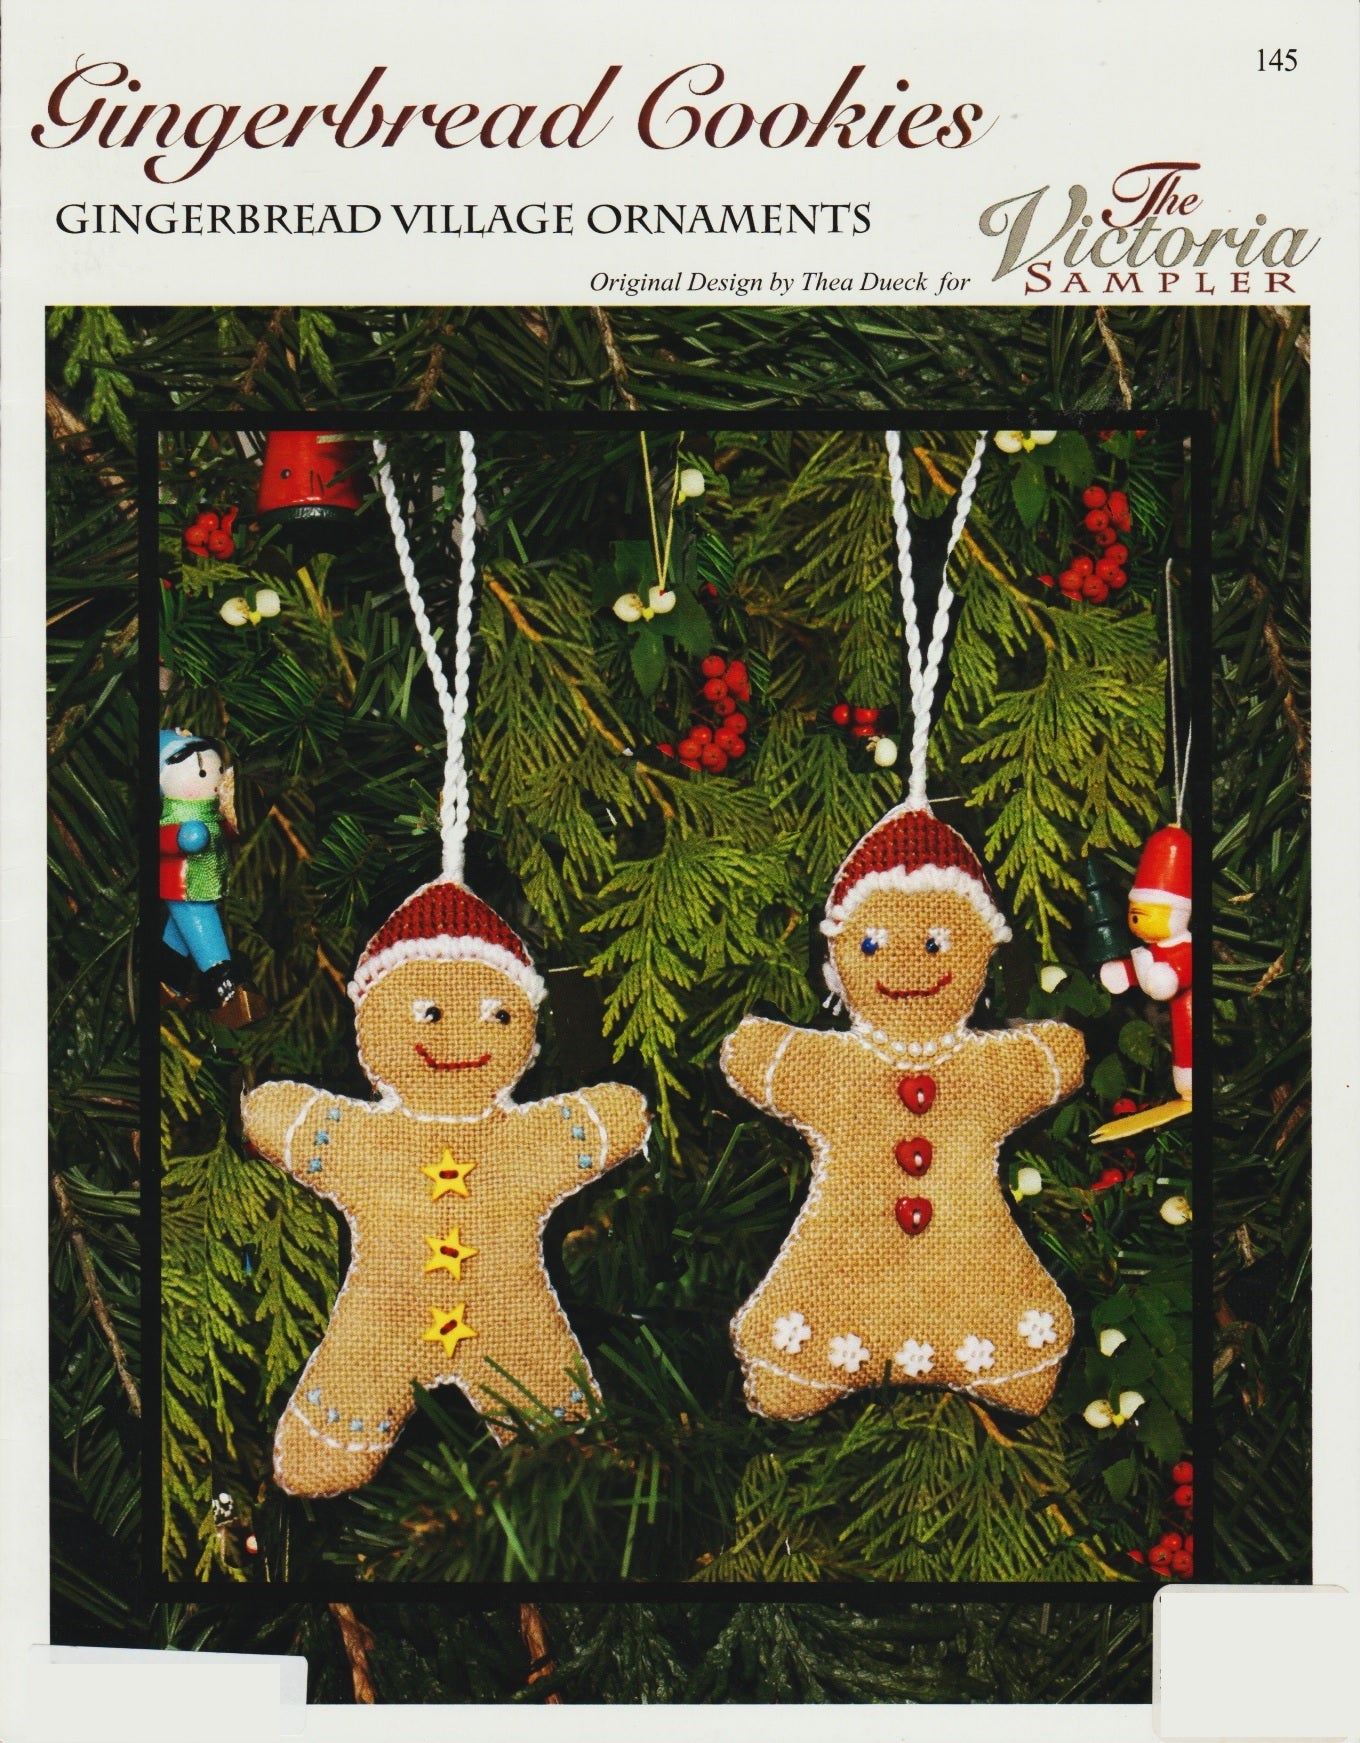 Victoria Samplers Gingerbread Cookies l45 christmas ornaments cross stitch pattern